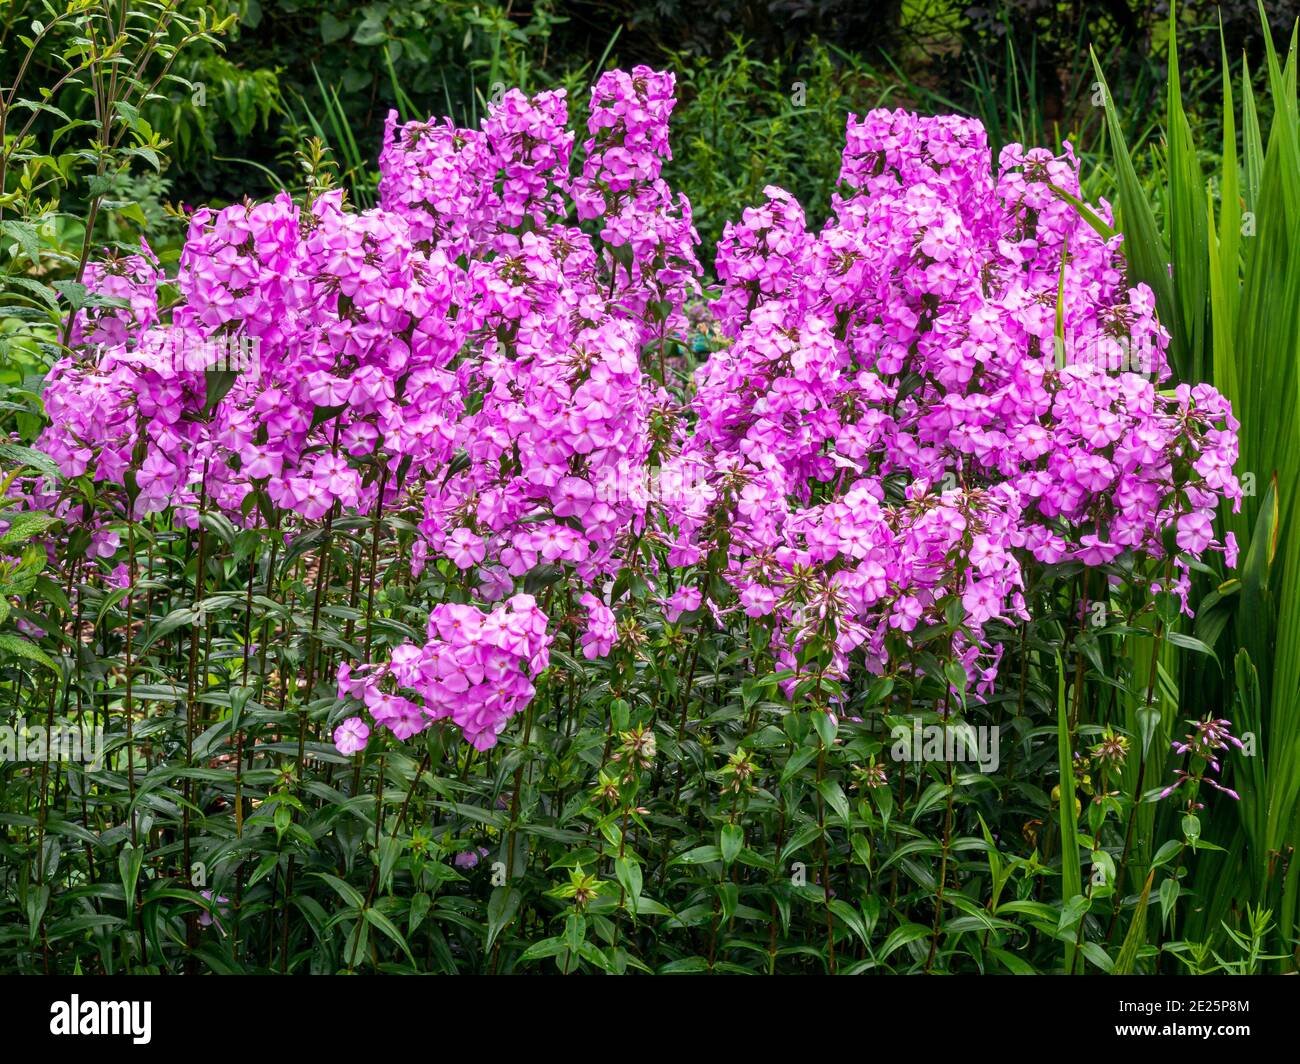 A clump of bright pink Phlox carolina Magnificence flowering amongst green vegetation in a garden Stock Photo